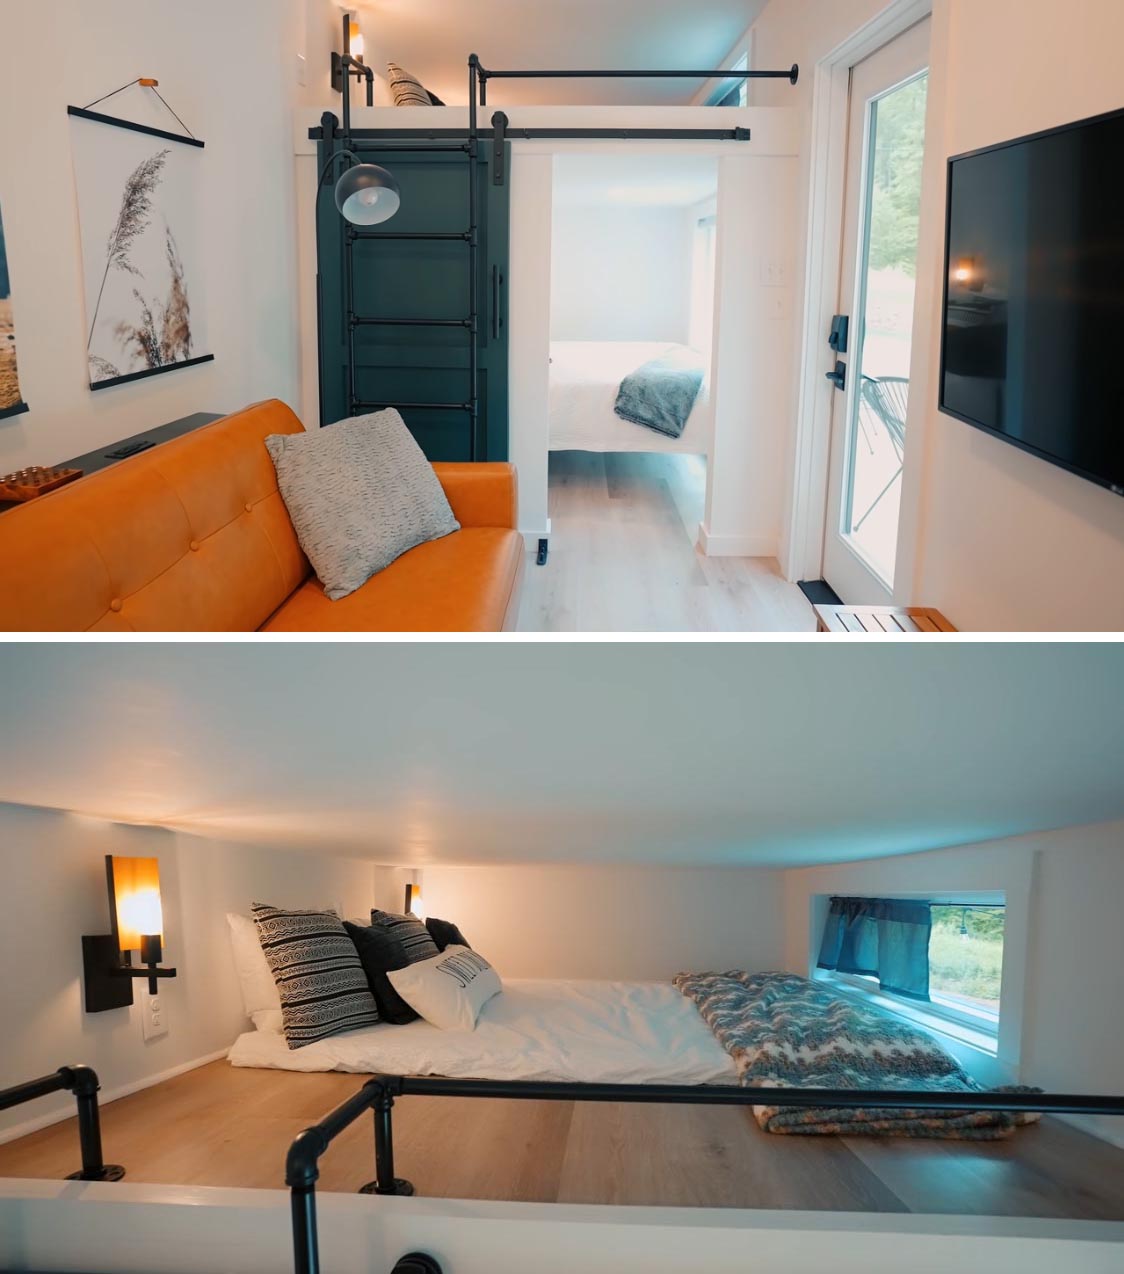 A shipping container home with a small bedroom and secondary lofted sleeping area.